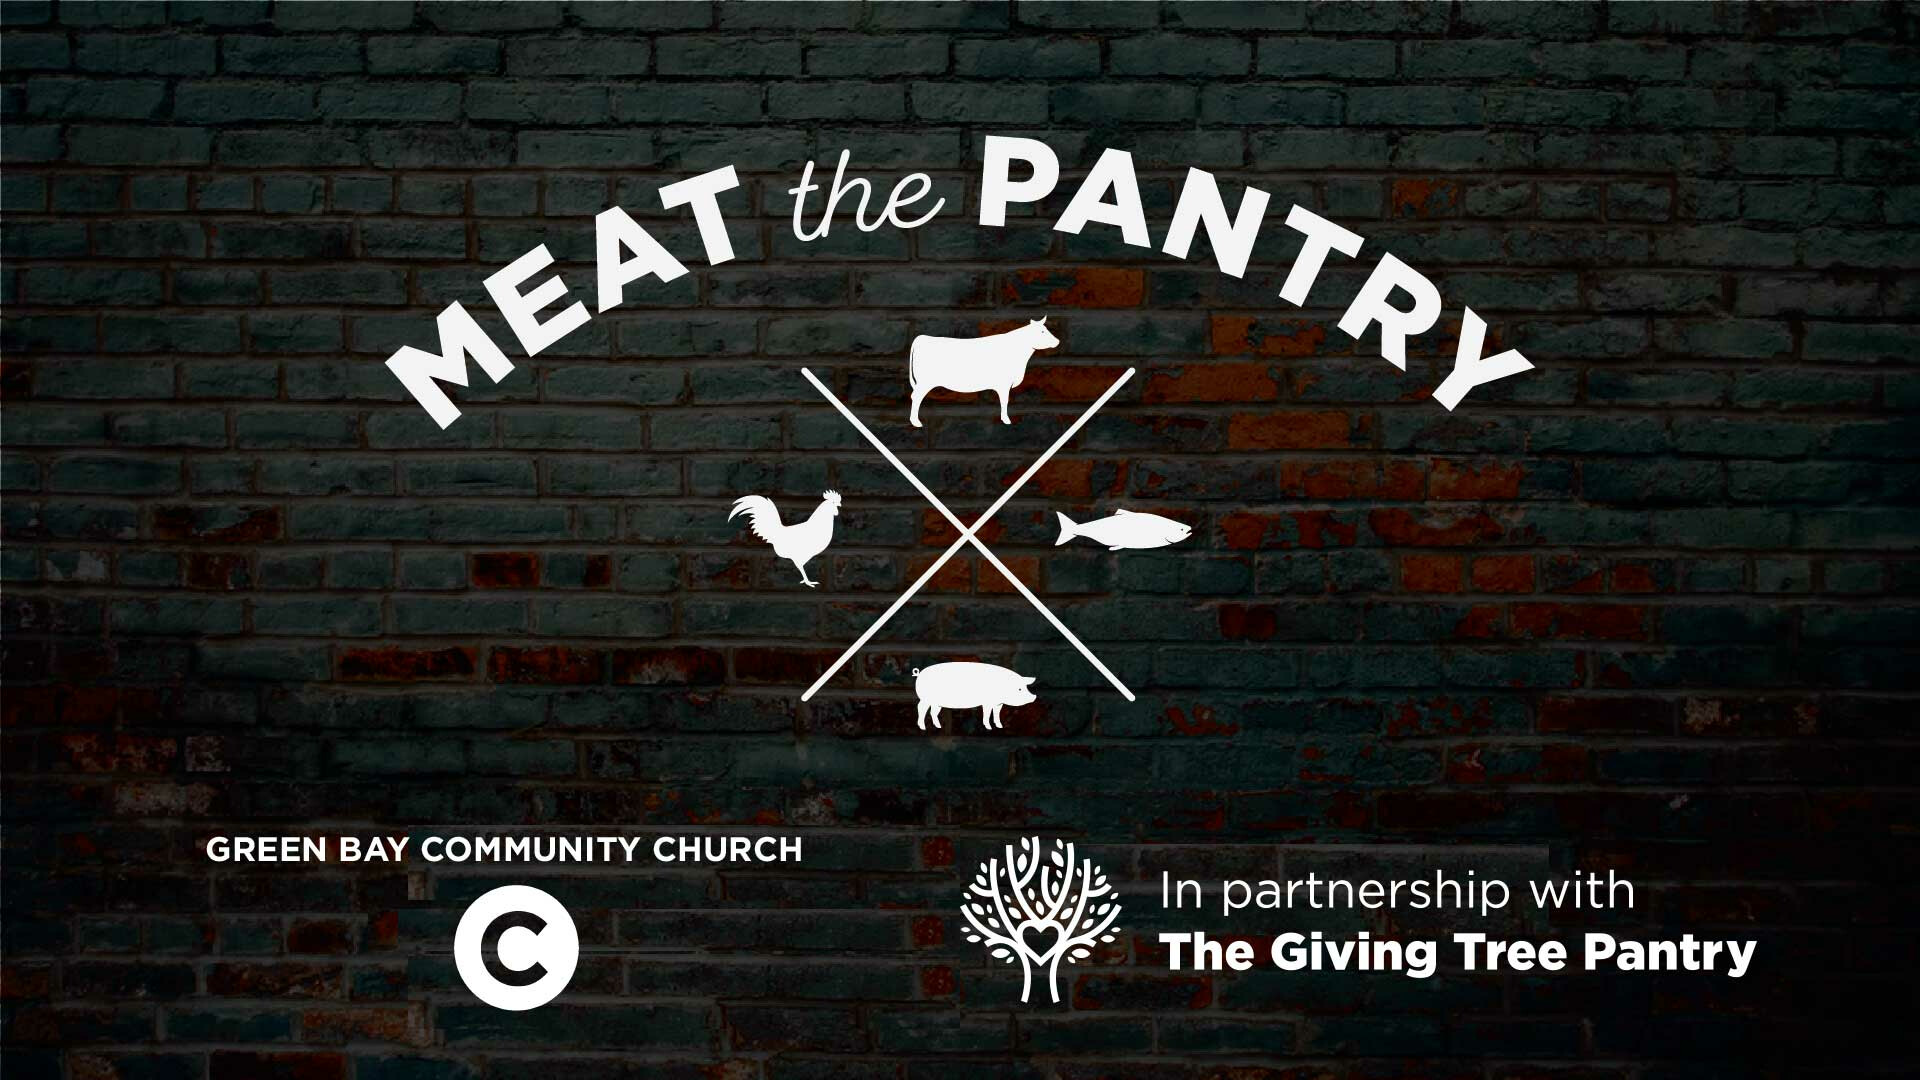 Meat the Pantry: Feb. 25 & 28